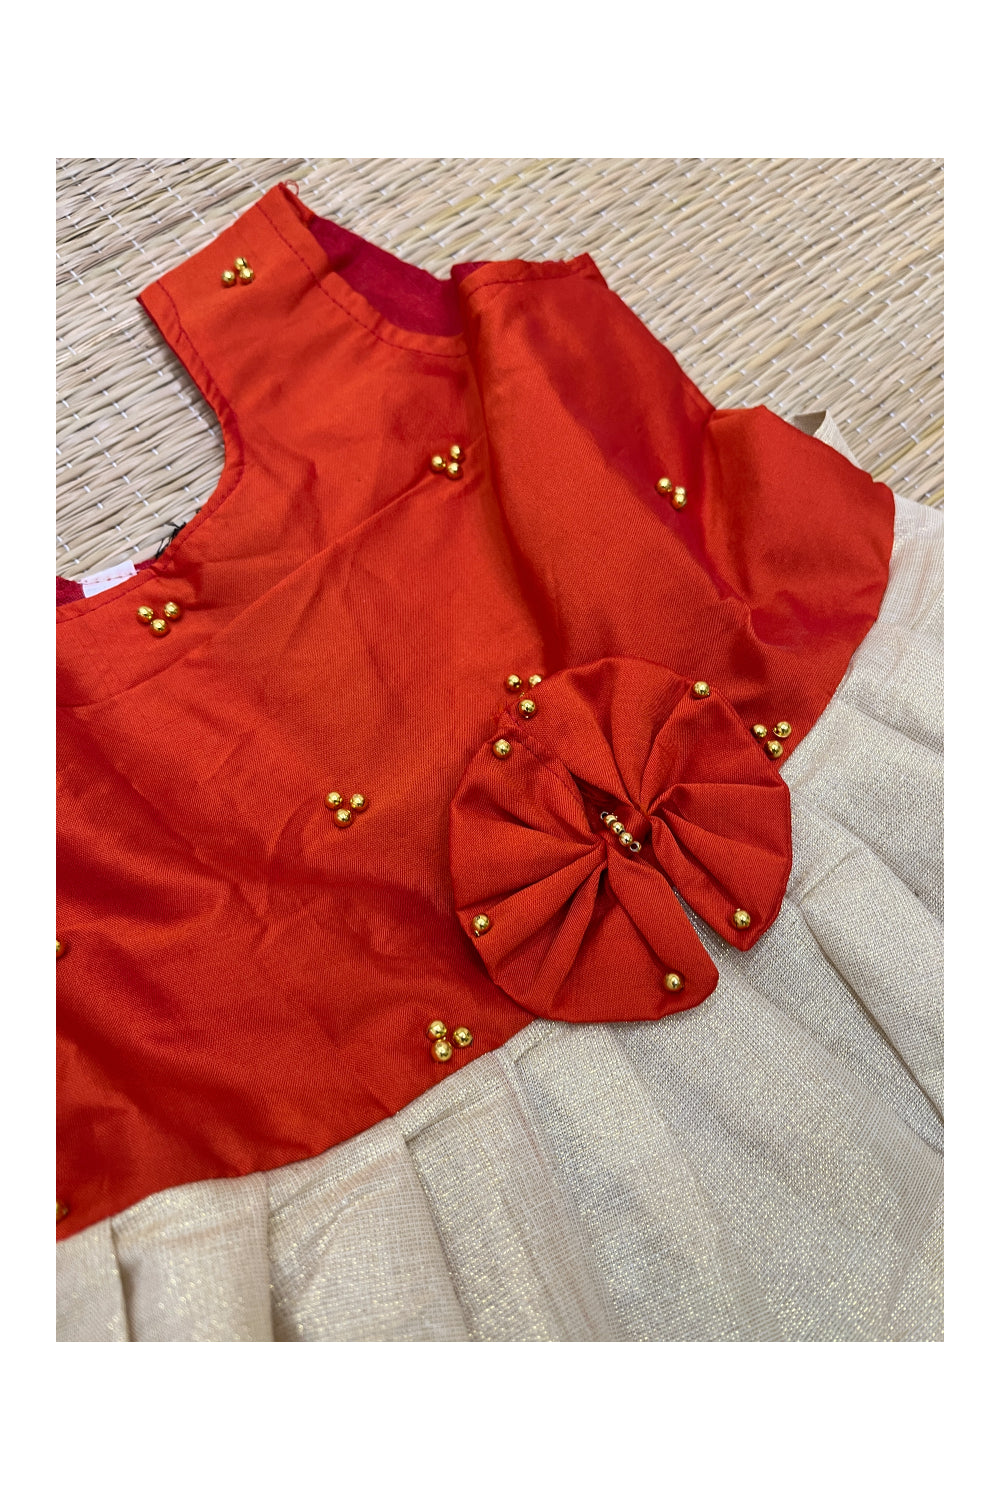 Southloom Kerala Tissue Frock with Red Bead Work Designs for Kids (3 Years)